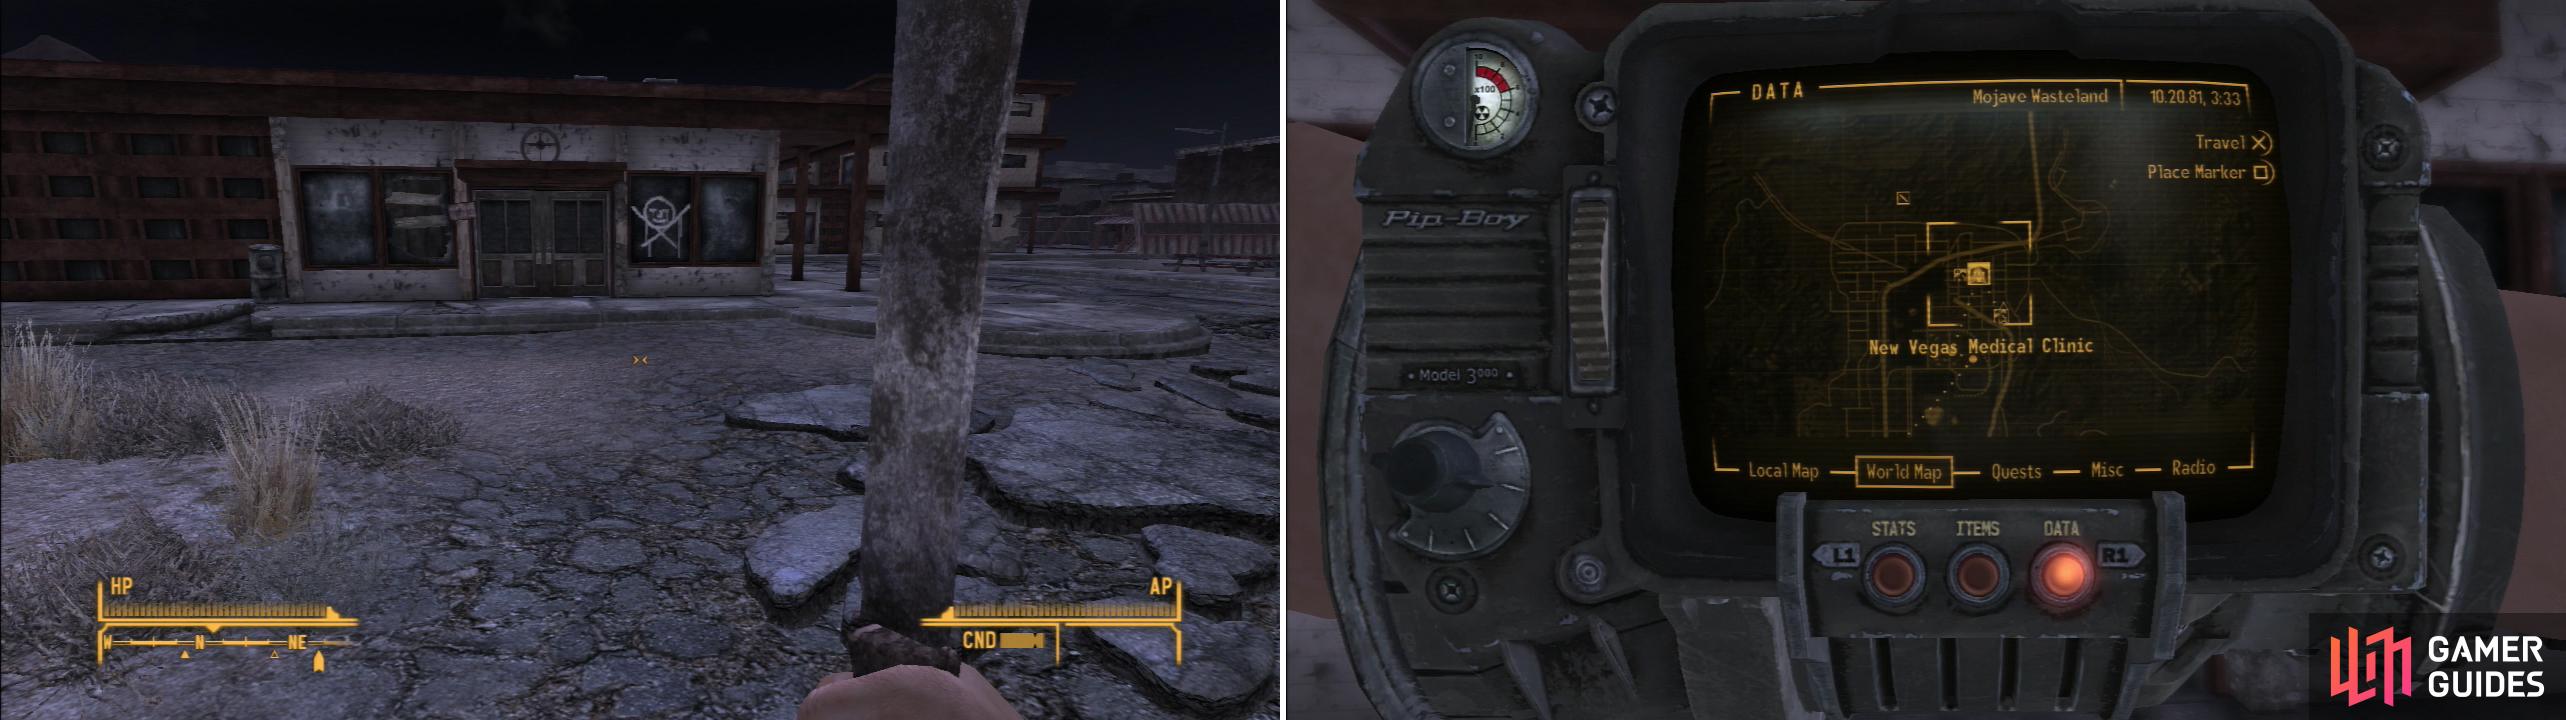 Pass through the New Vegas outskirts to finally reach your destination; the New Vegas Medical Clinic (left). Note its location on the Pip-Boy World Map (right).